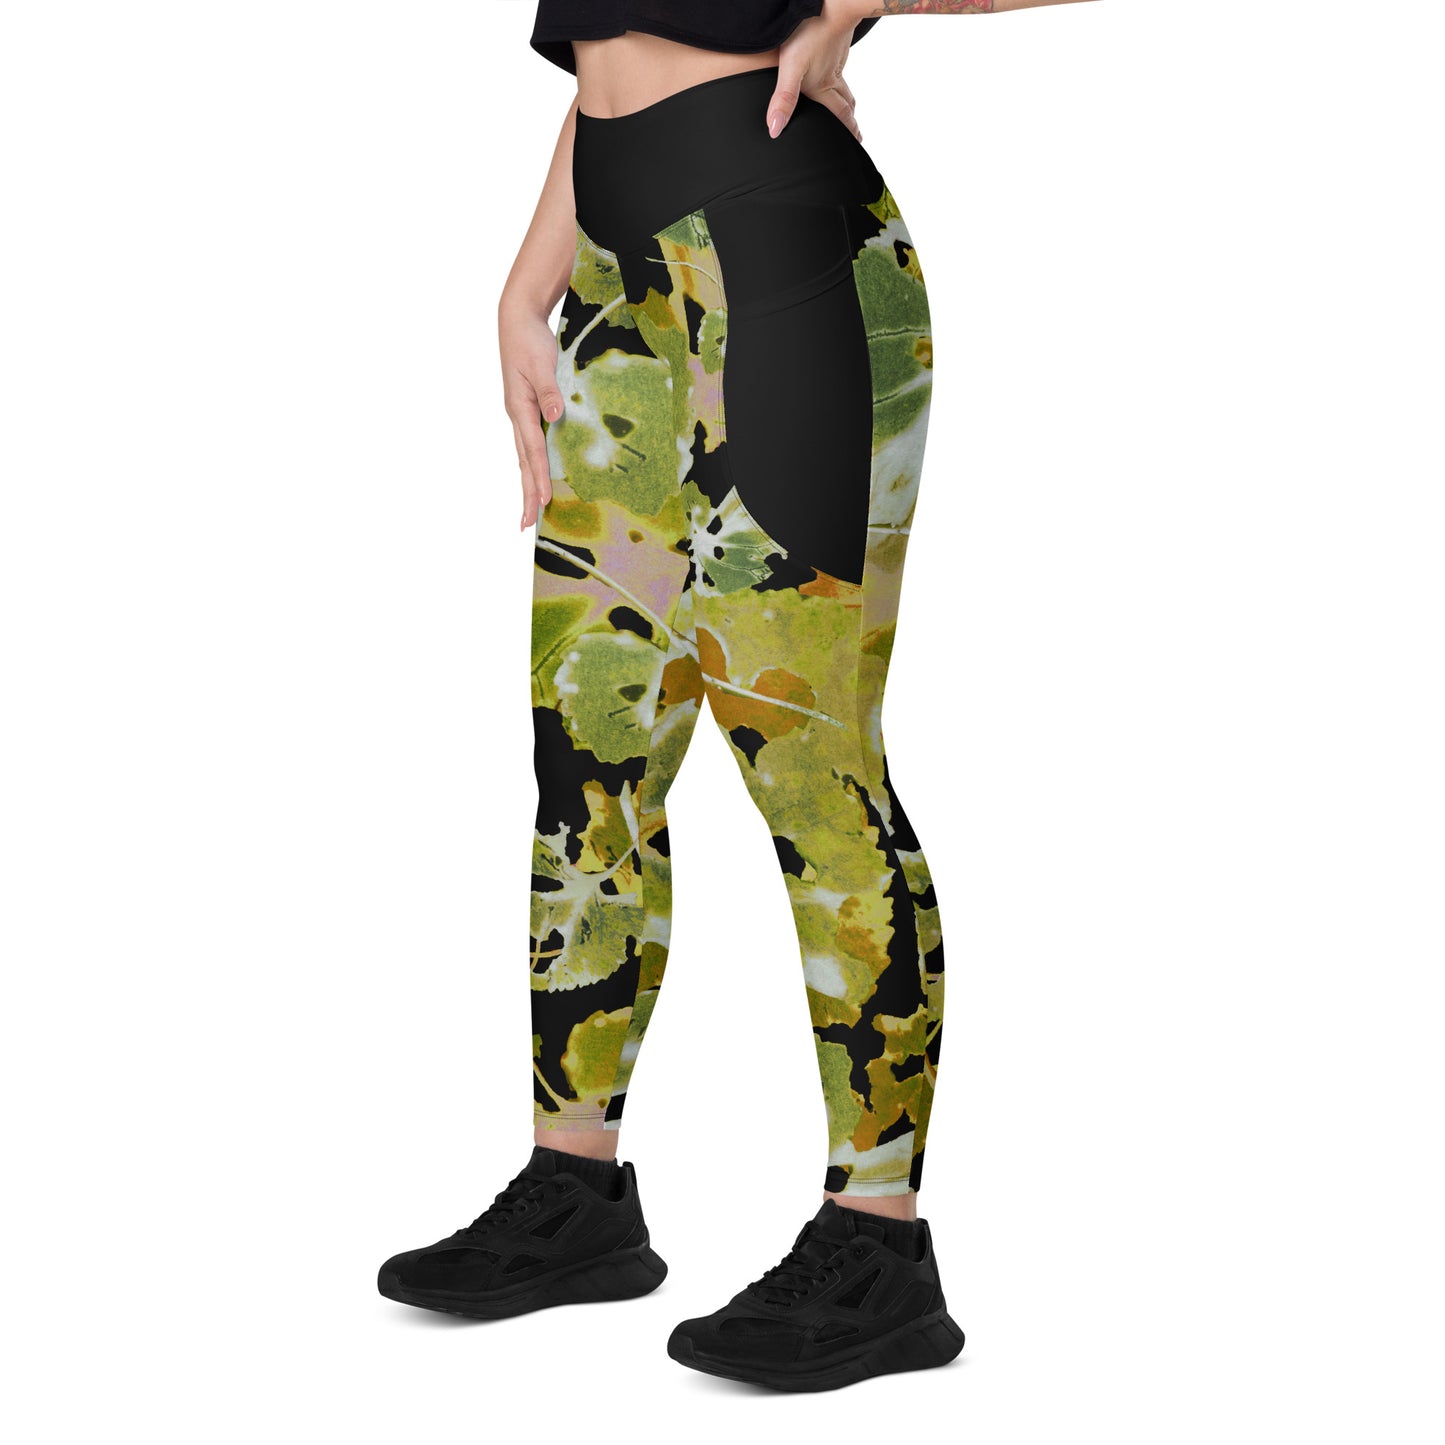 Violet Vibrations Leggings with pockets